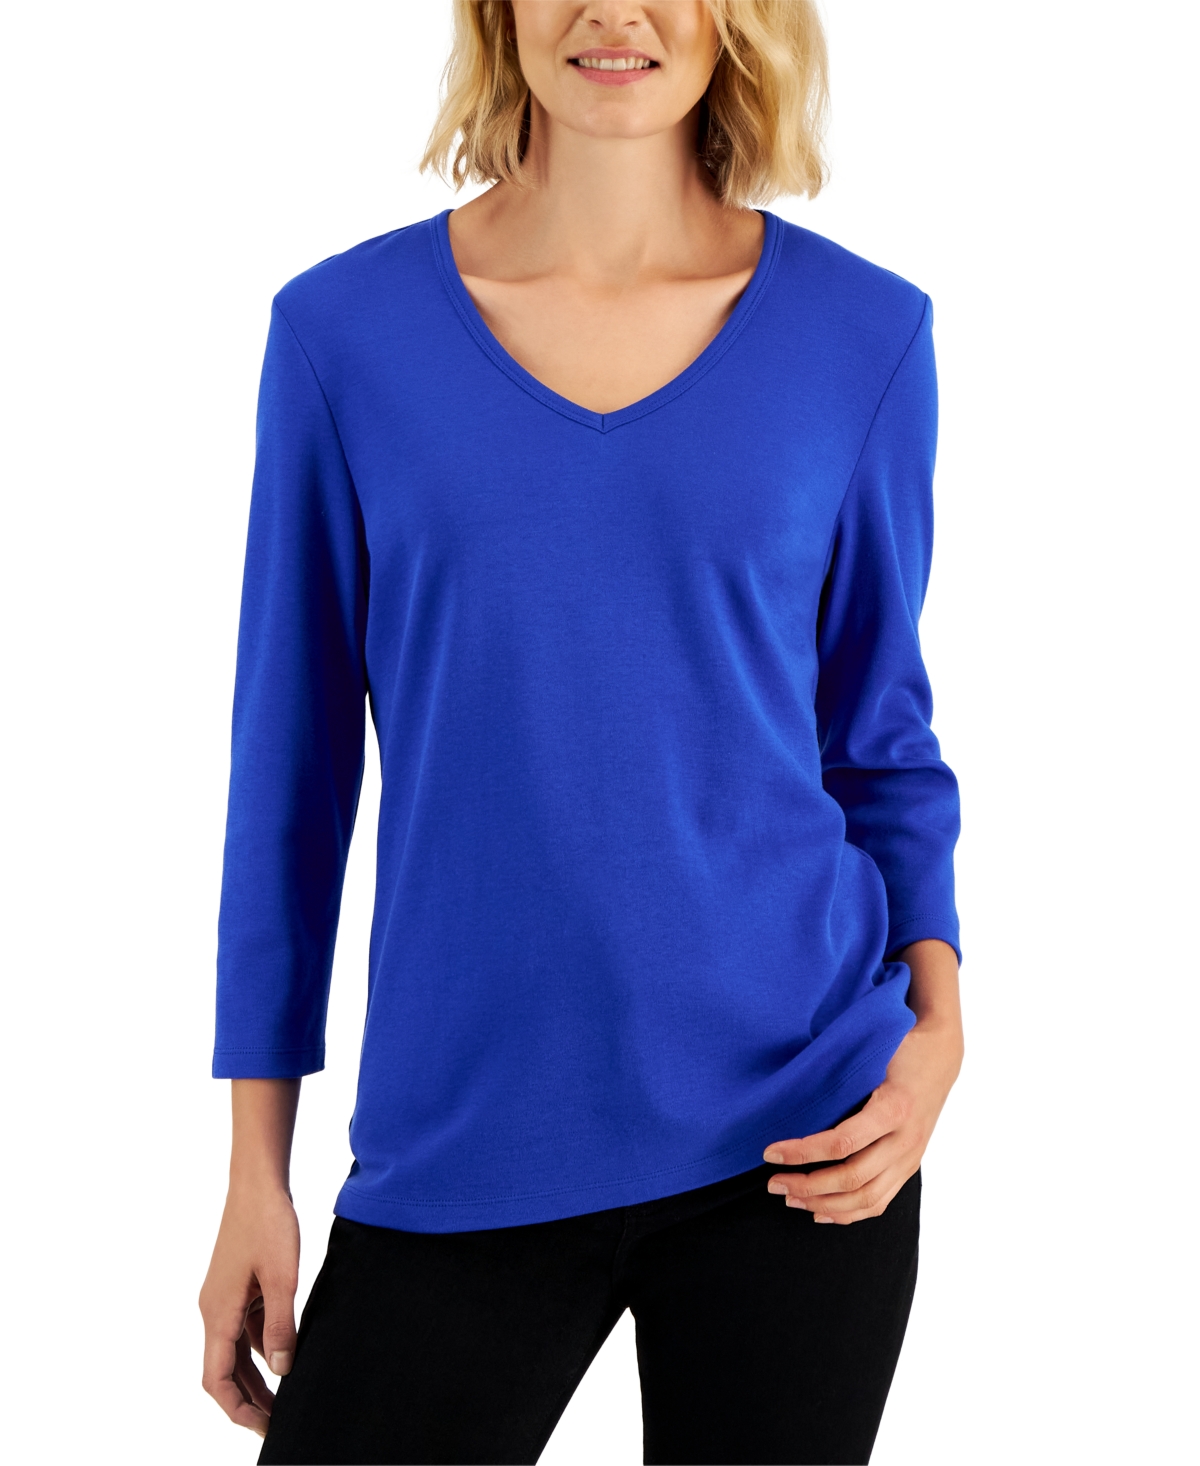 V-Neck 3/4-Sleeve Top, Created for Macy's - Ultra Blue